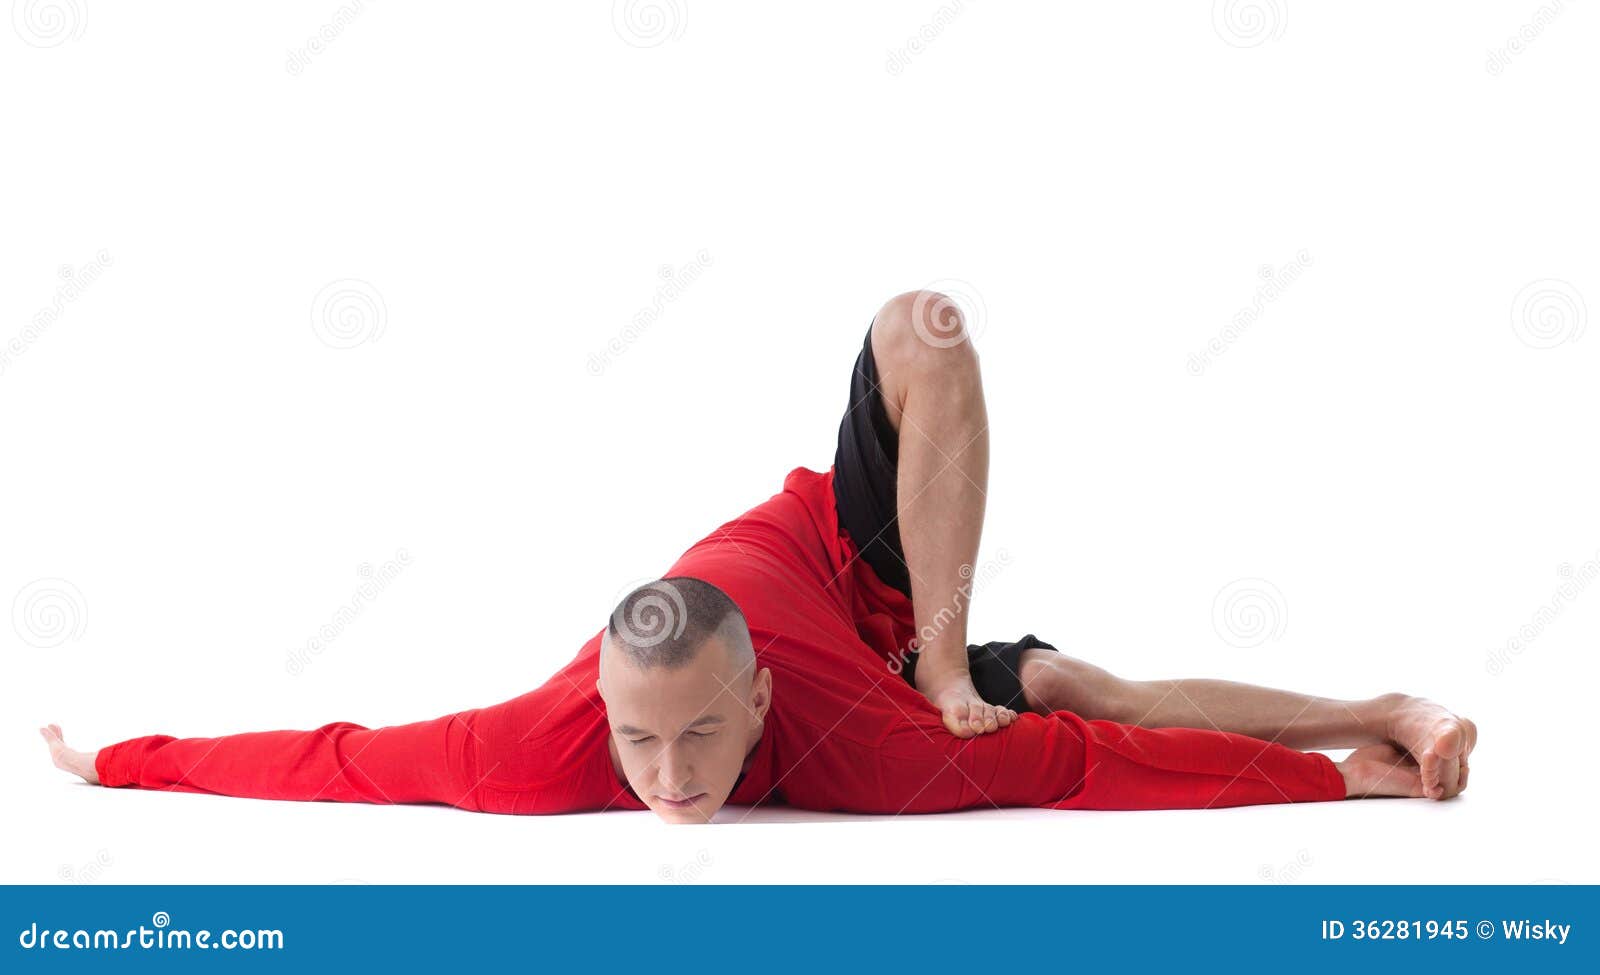 Flexible Man Posing in Difficult Yoga Pose Stock Image - Image of handsome,  trainer: 36281945